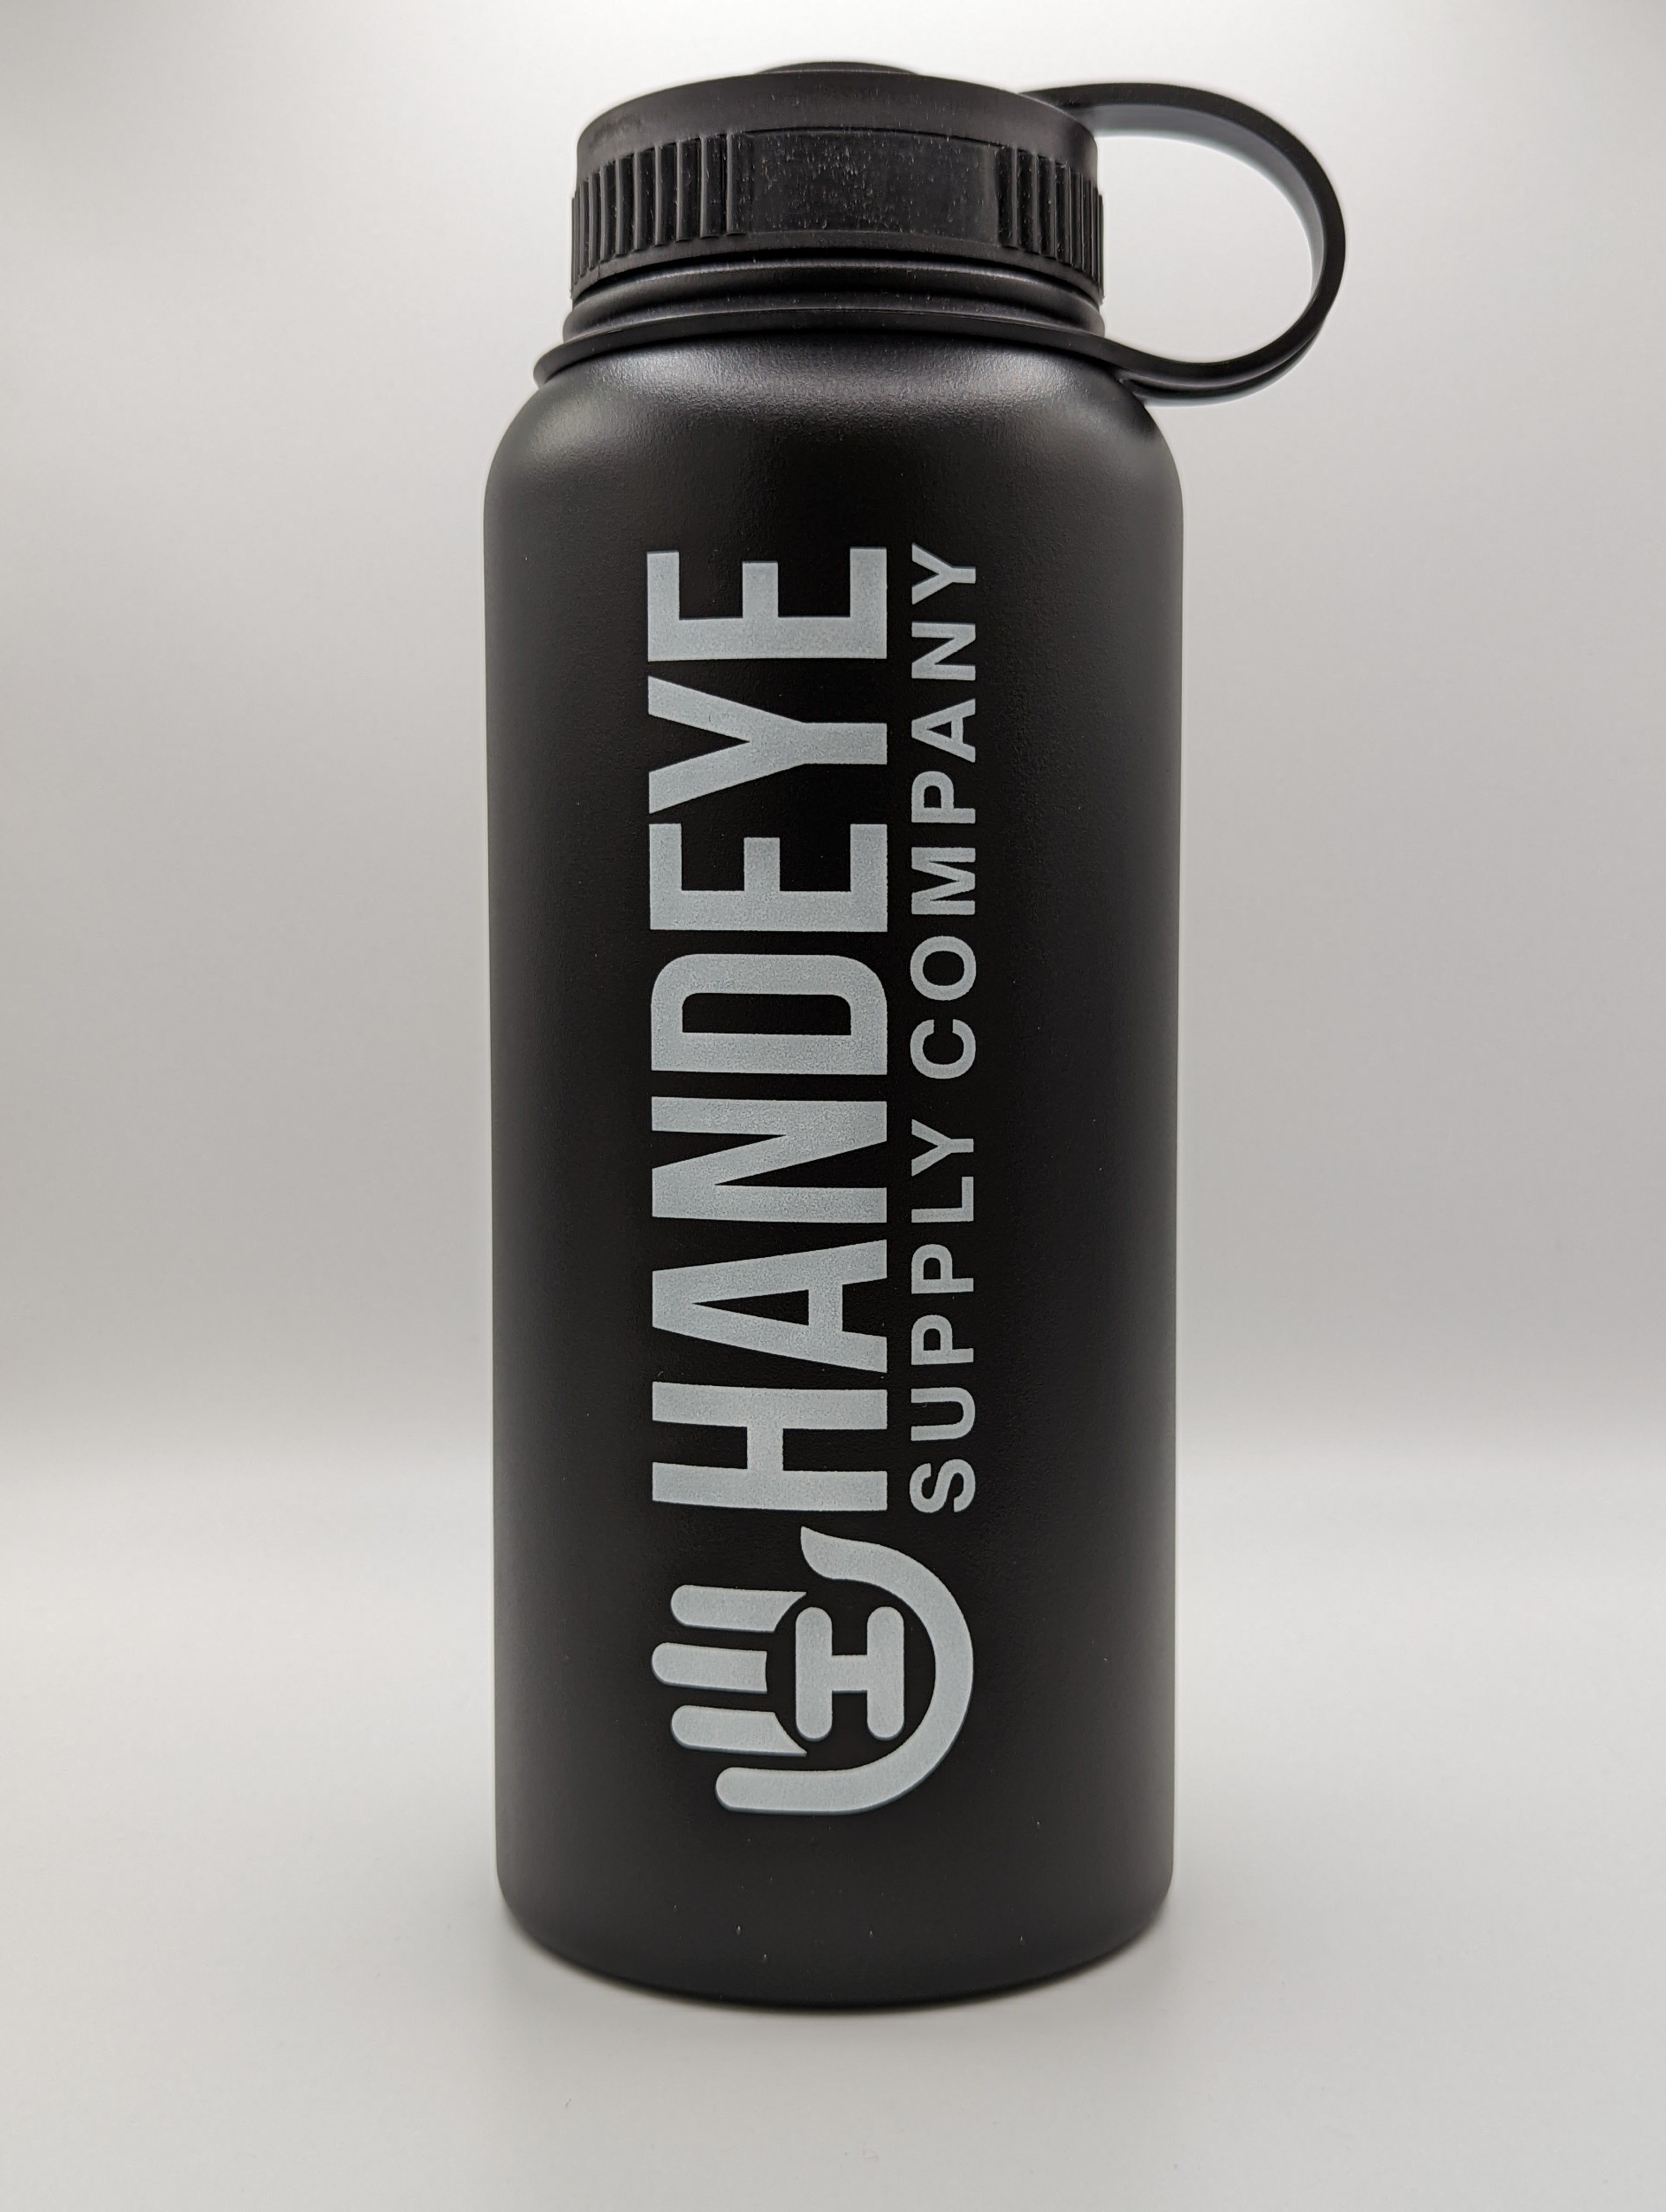 32oz Stainless Steel Canteen Water Bottle - Jersey Discs